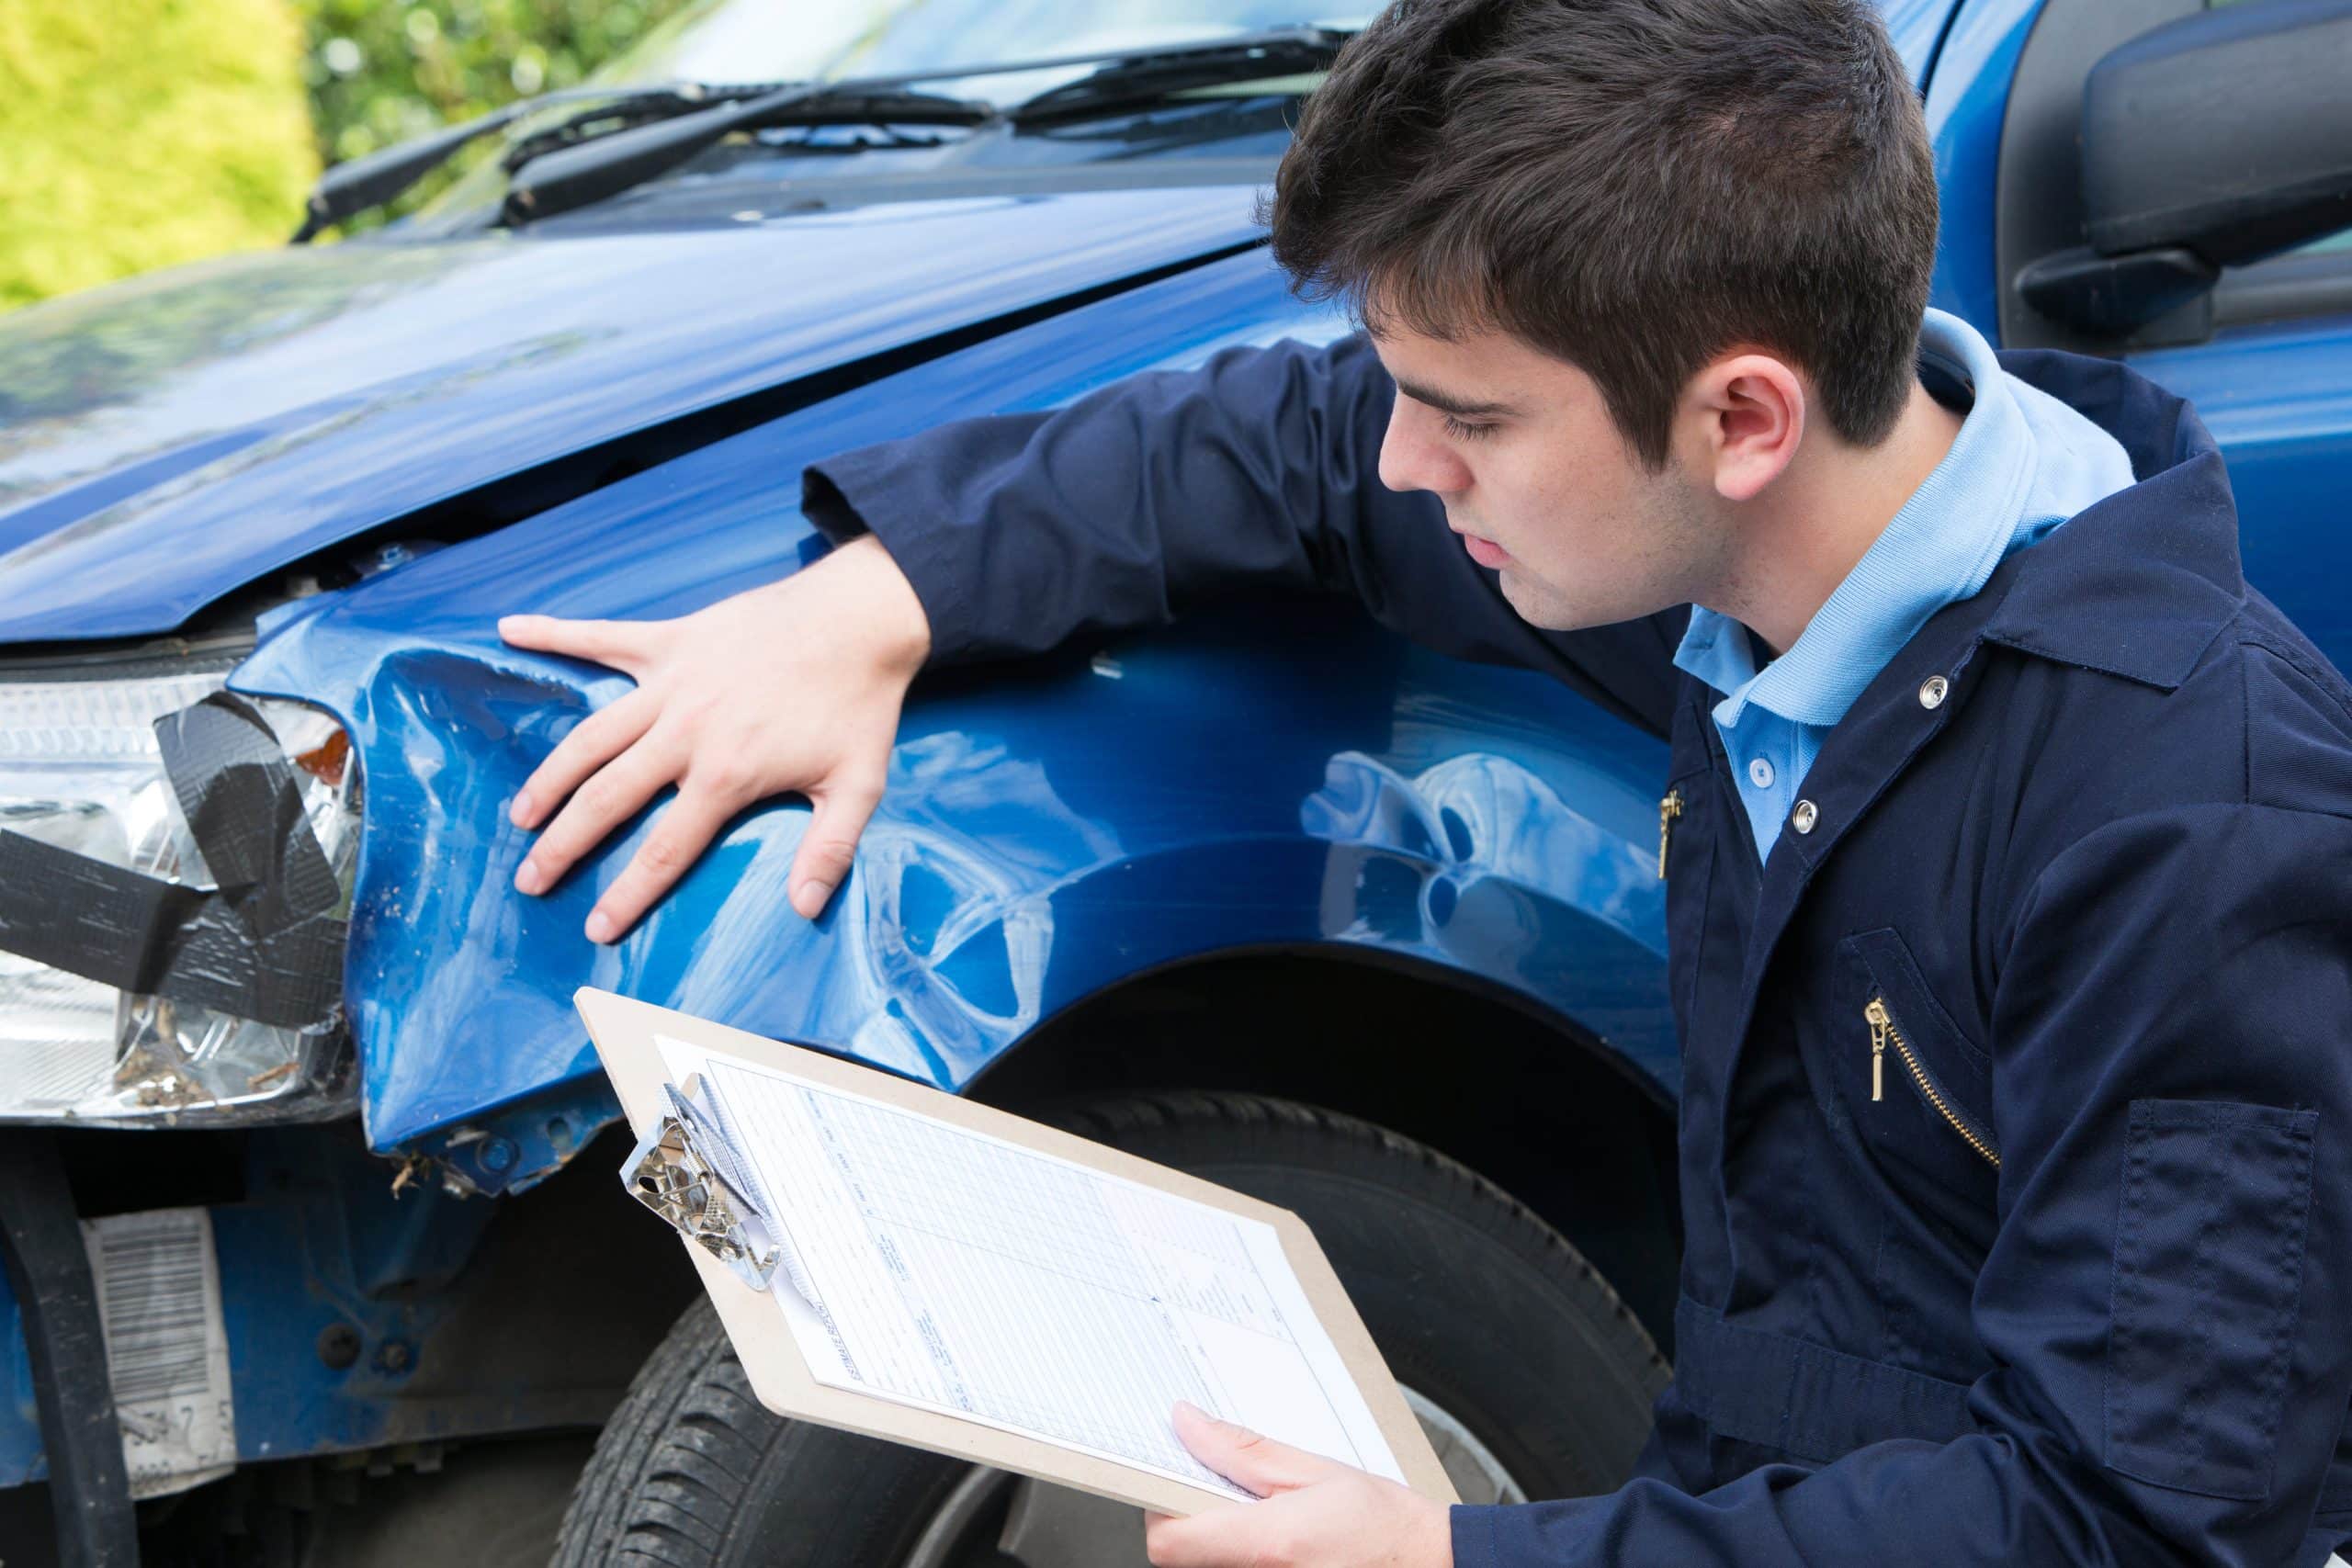 insurance adjuster inspecting damage after a car accident